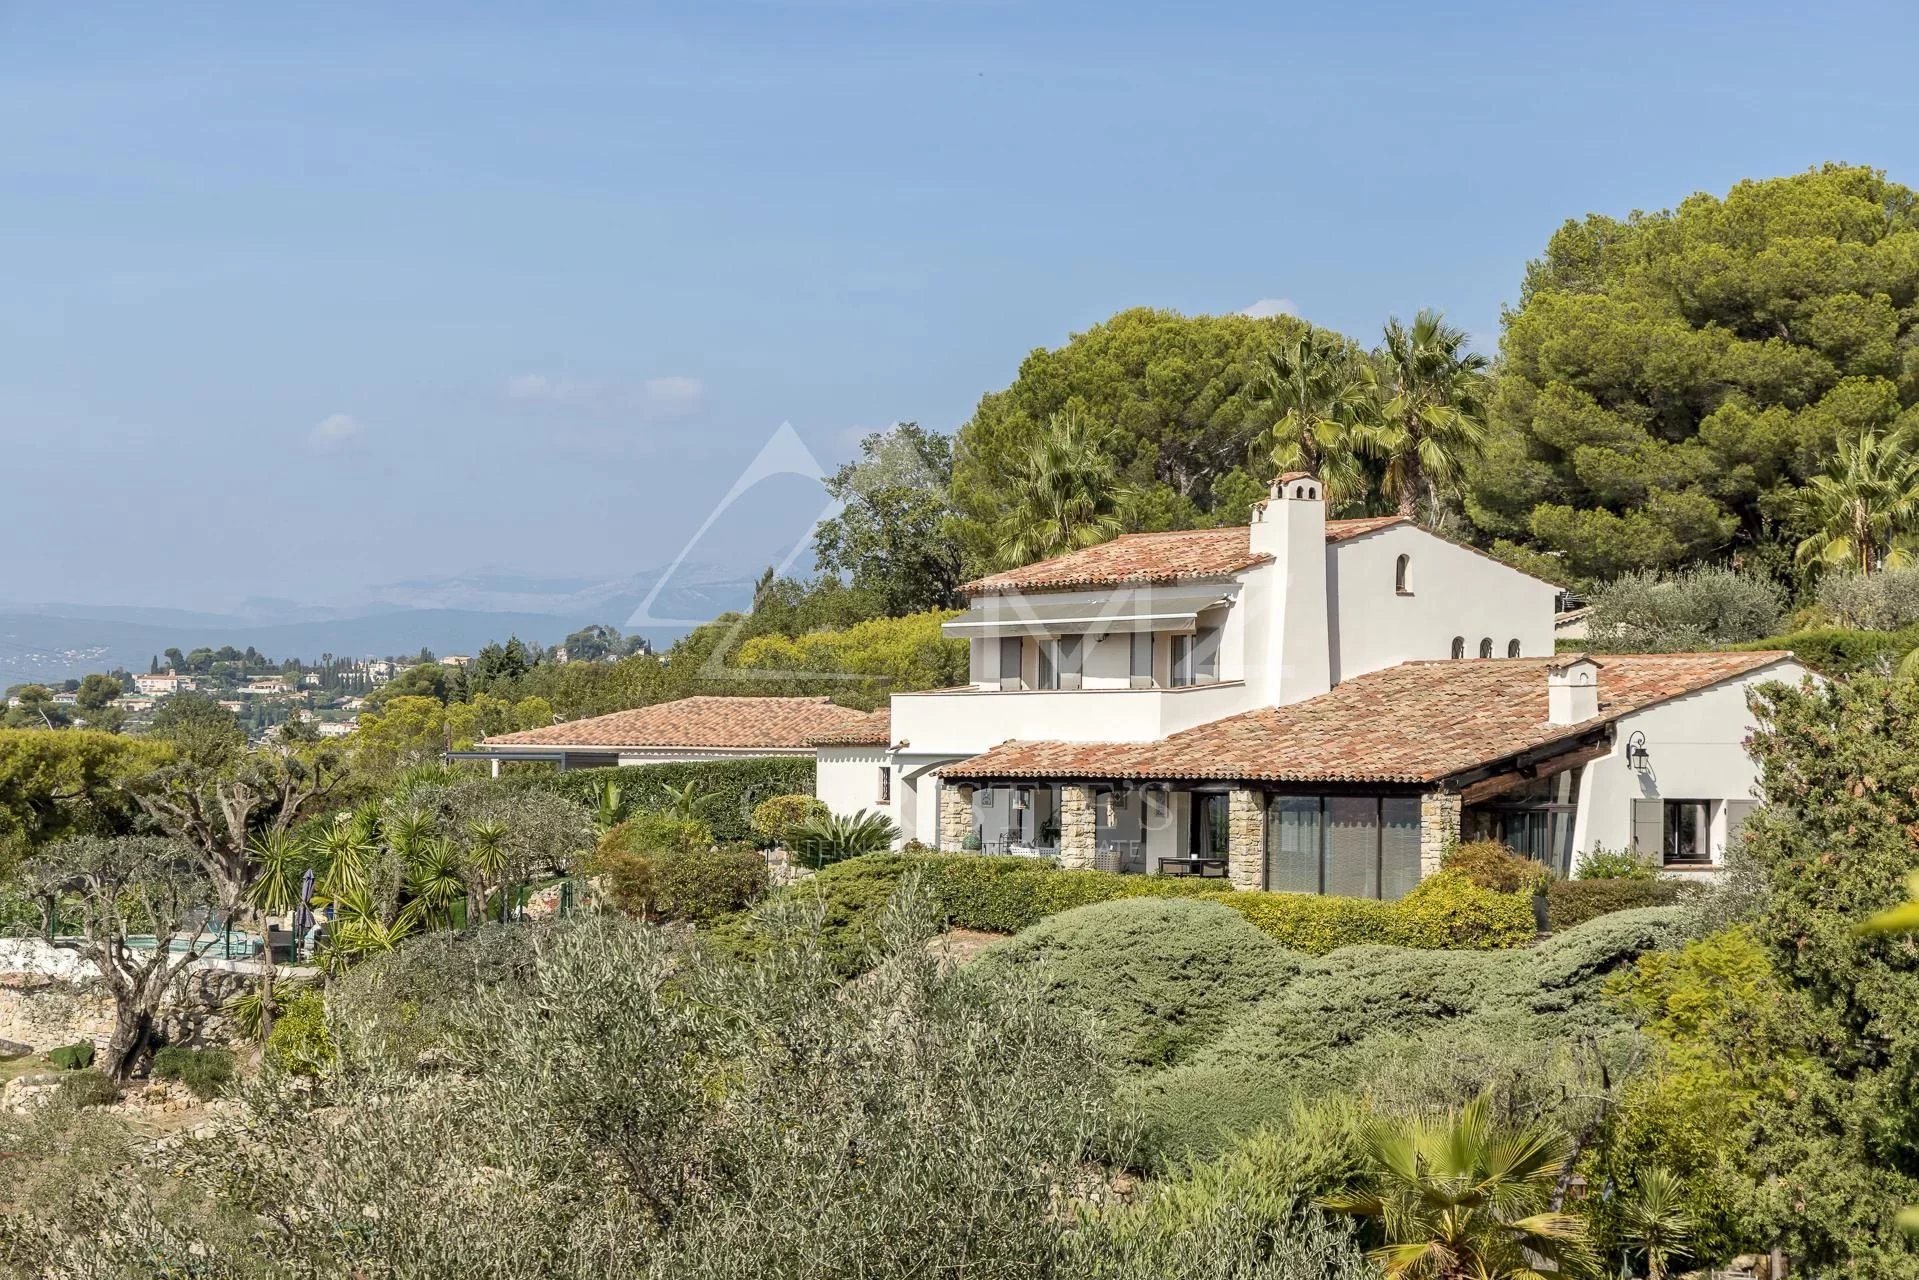 Residential area close to Cannes, very nice view of the sea and hills